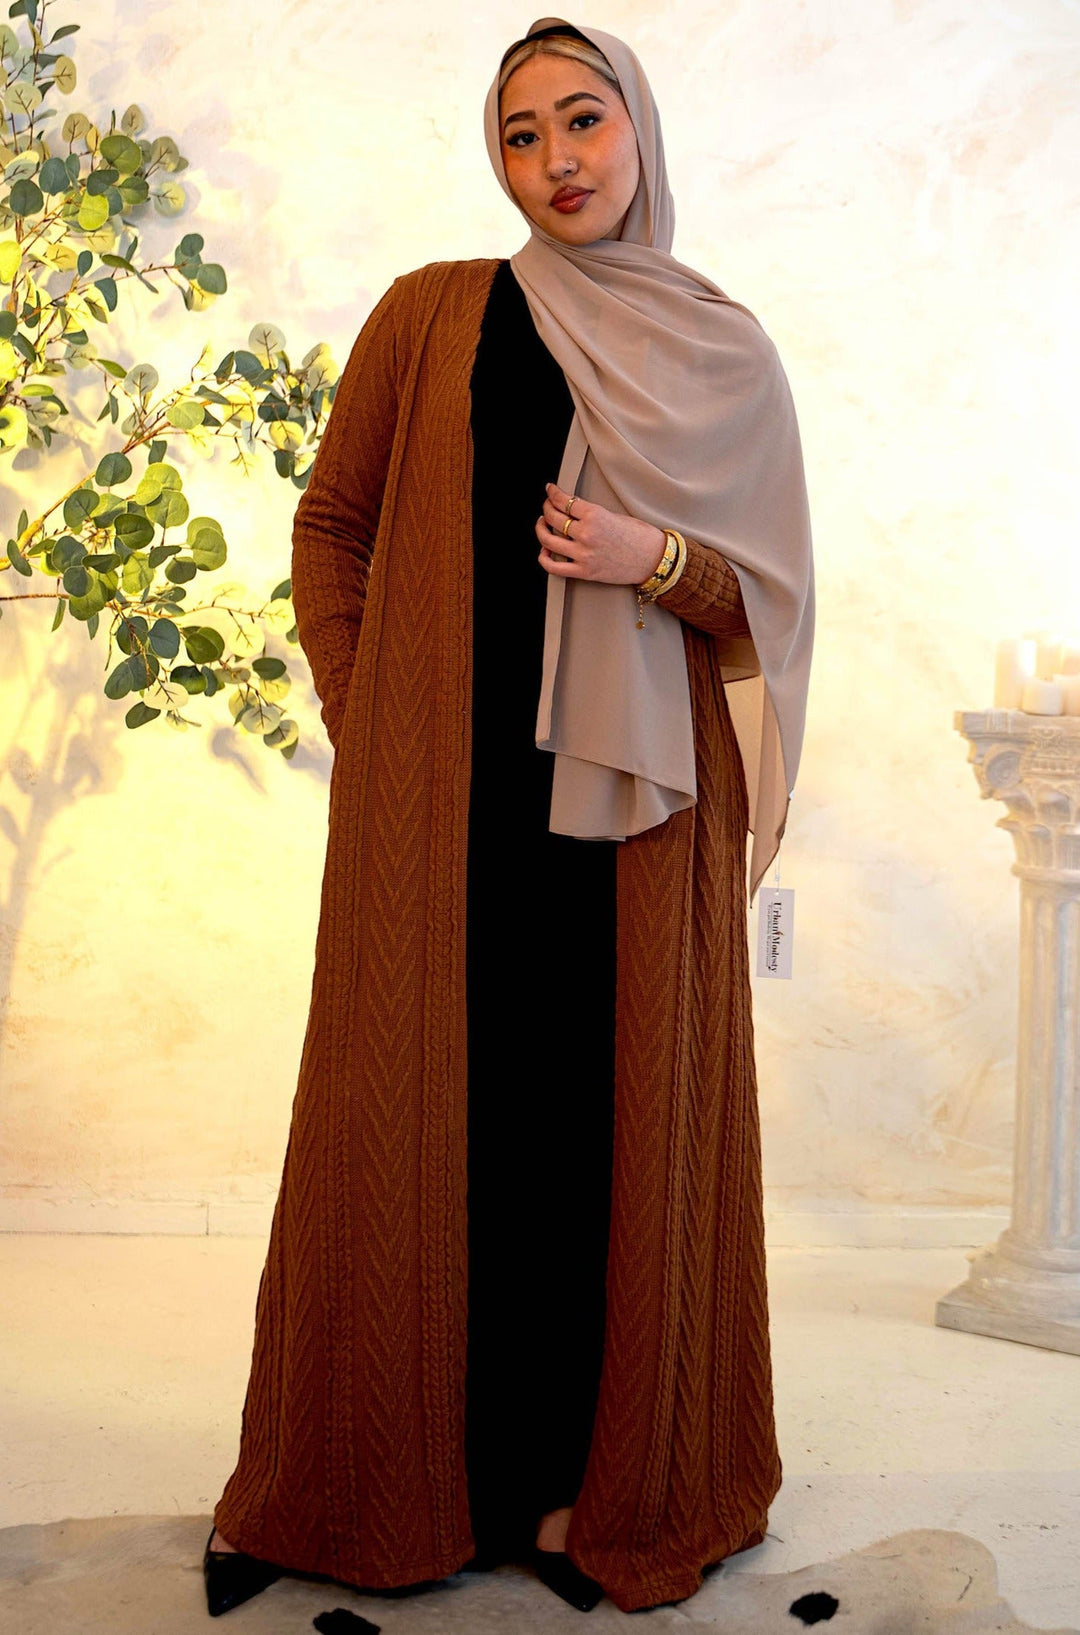 a woman wearing a brown shawl standing in front of a tree